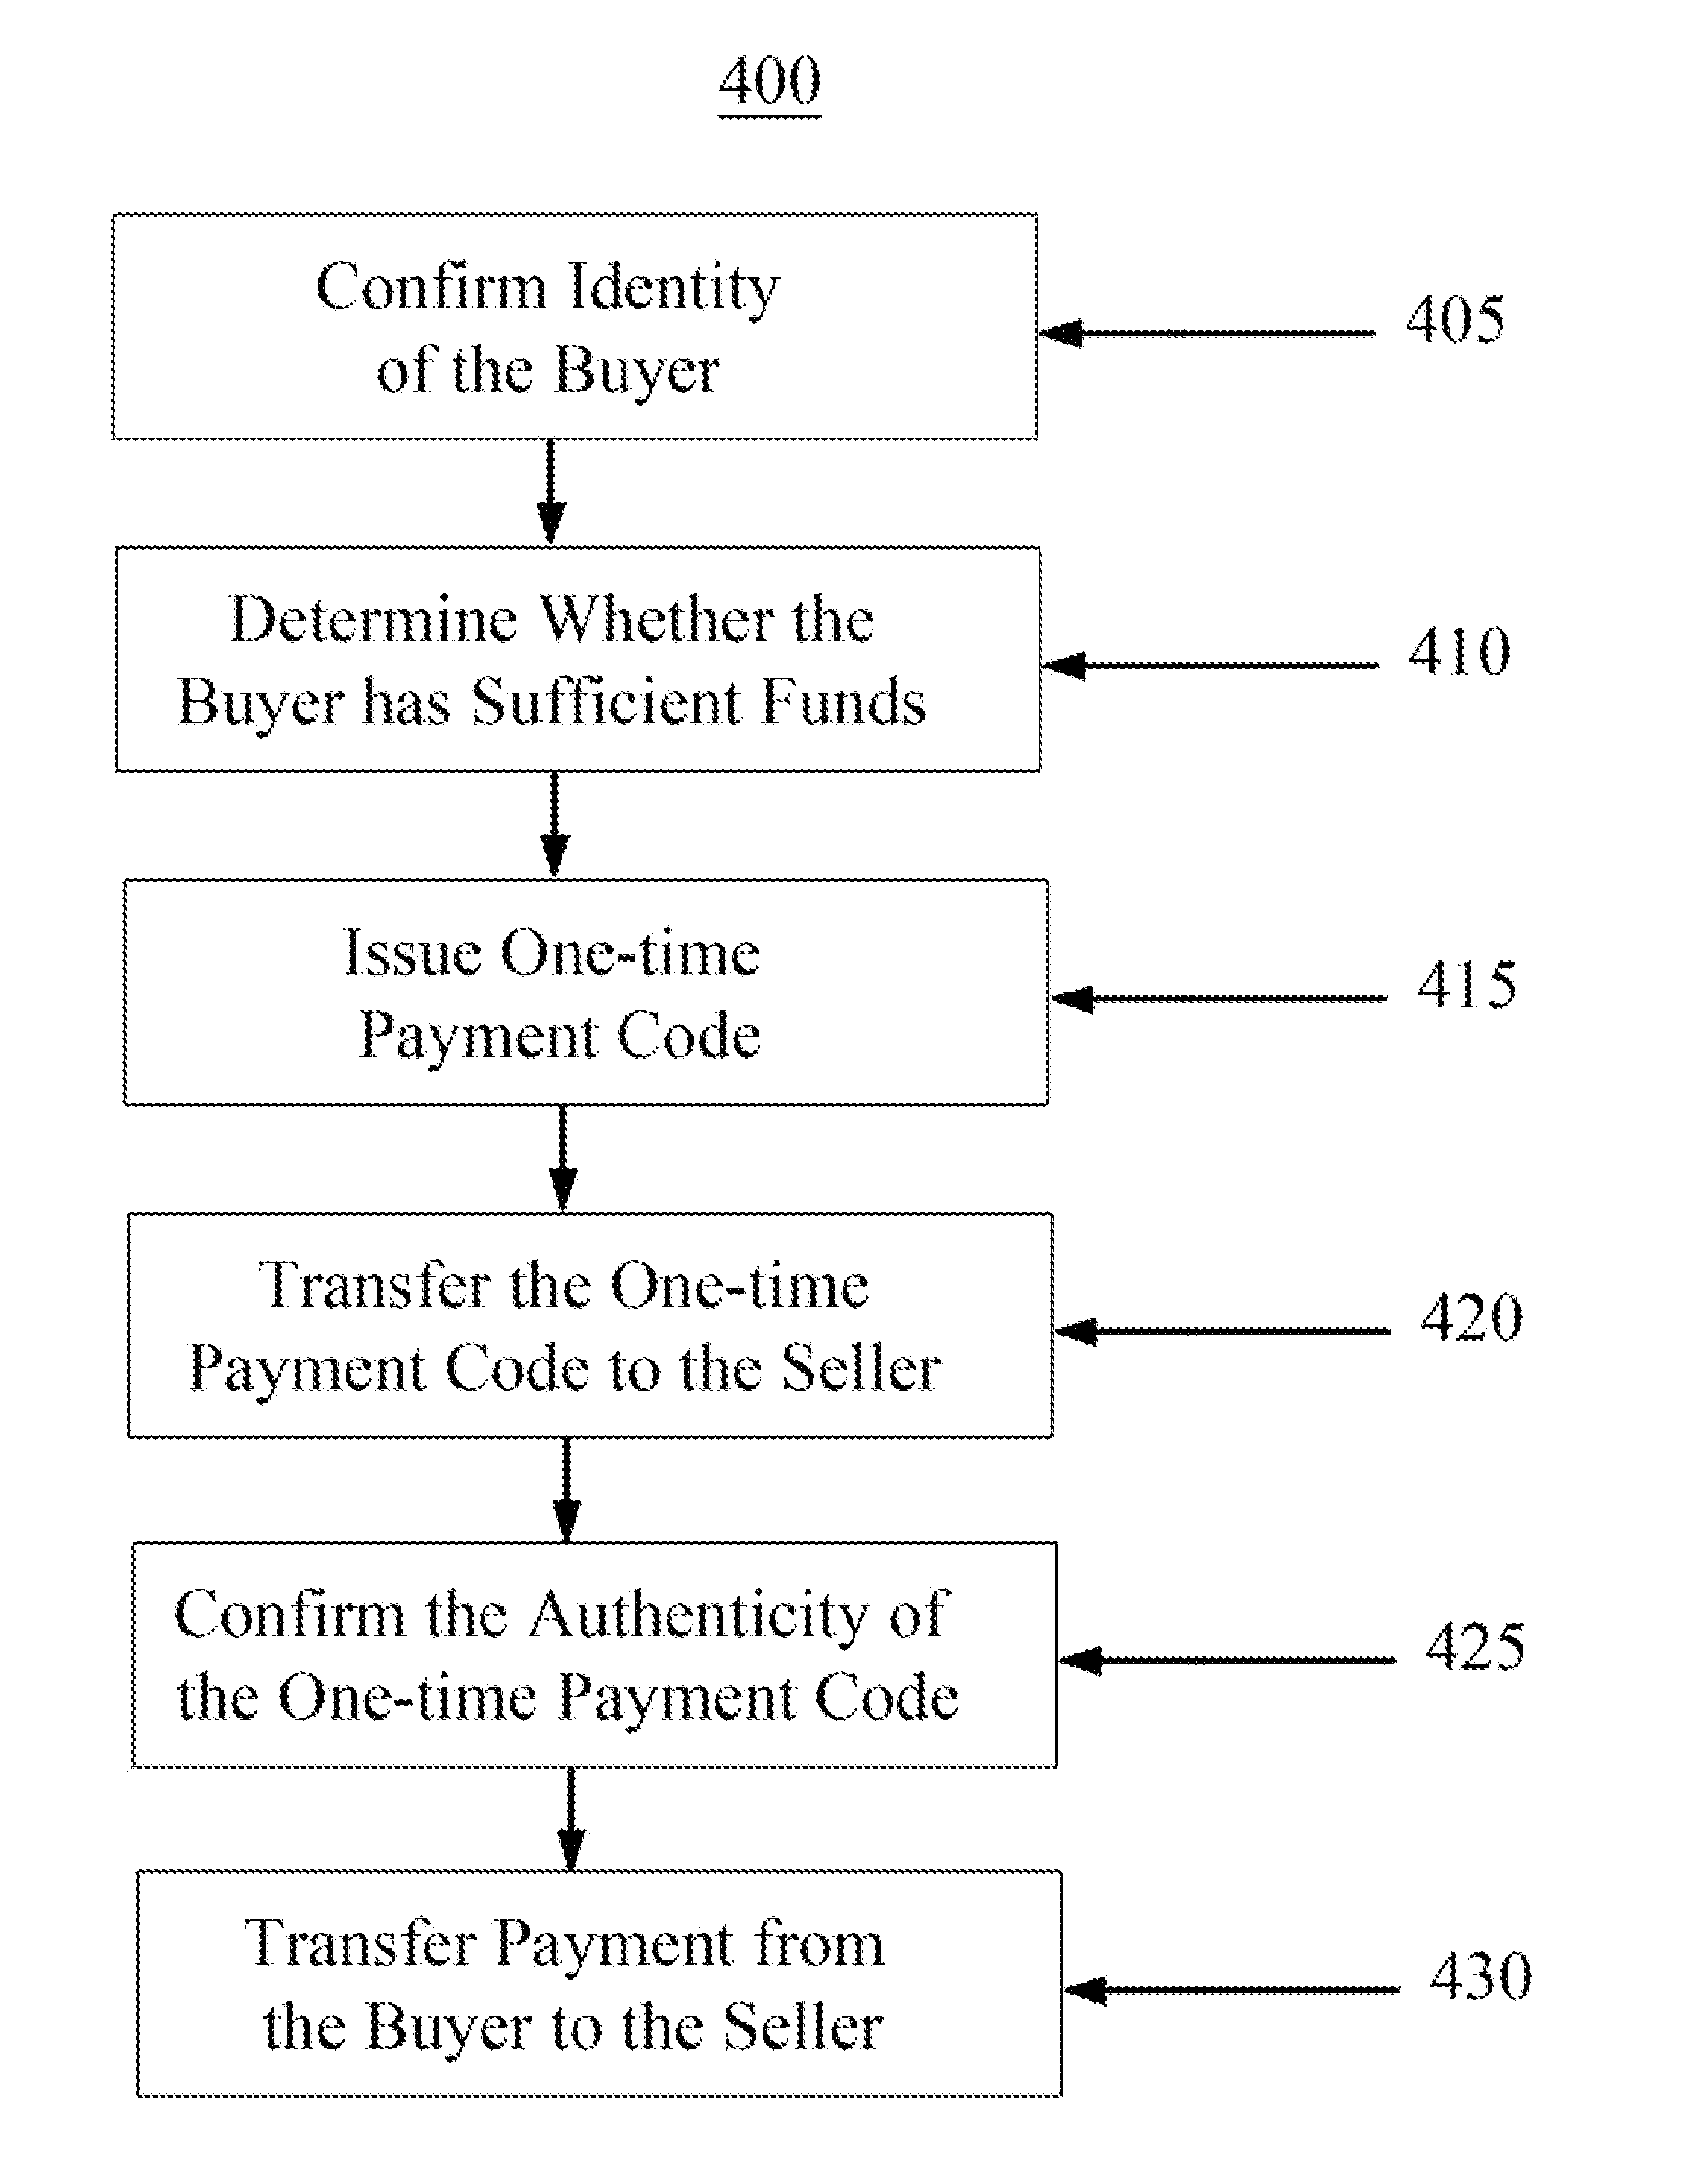 Systems and methods for completing a financial transaction